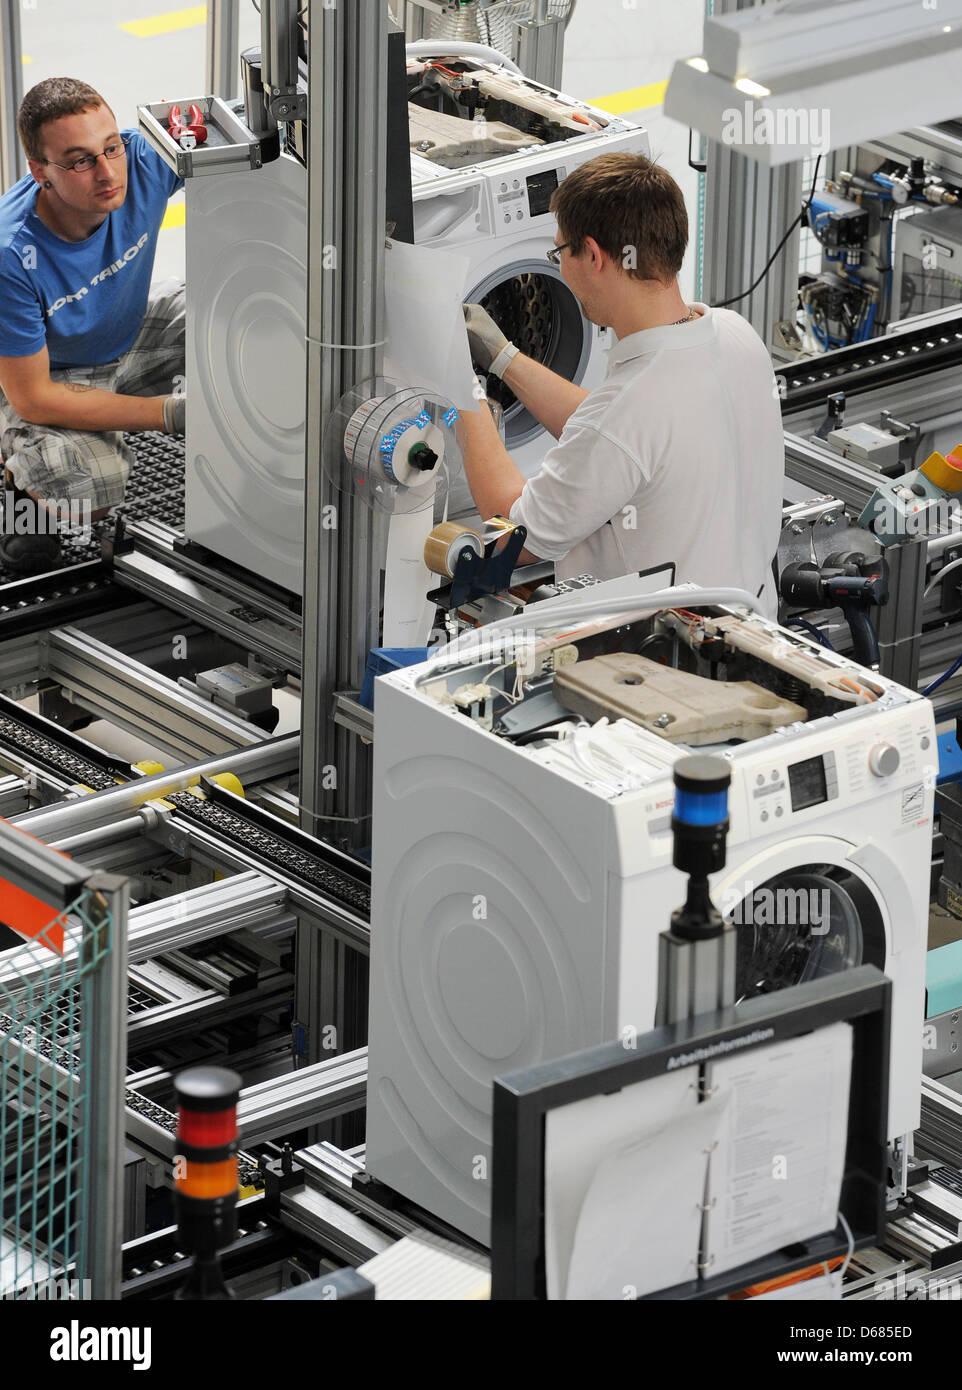 Workers of Bosch Siemens Hausgeraete GmbH assemble washing machines in  Nauen, Germany, 4 July 2012. About 600 employees produce approximately  800,000 premium-quality washing machines annually, of which two thirds are  exported. BSH